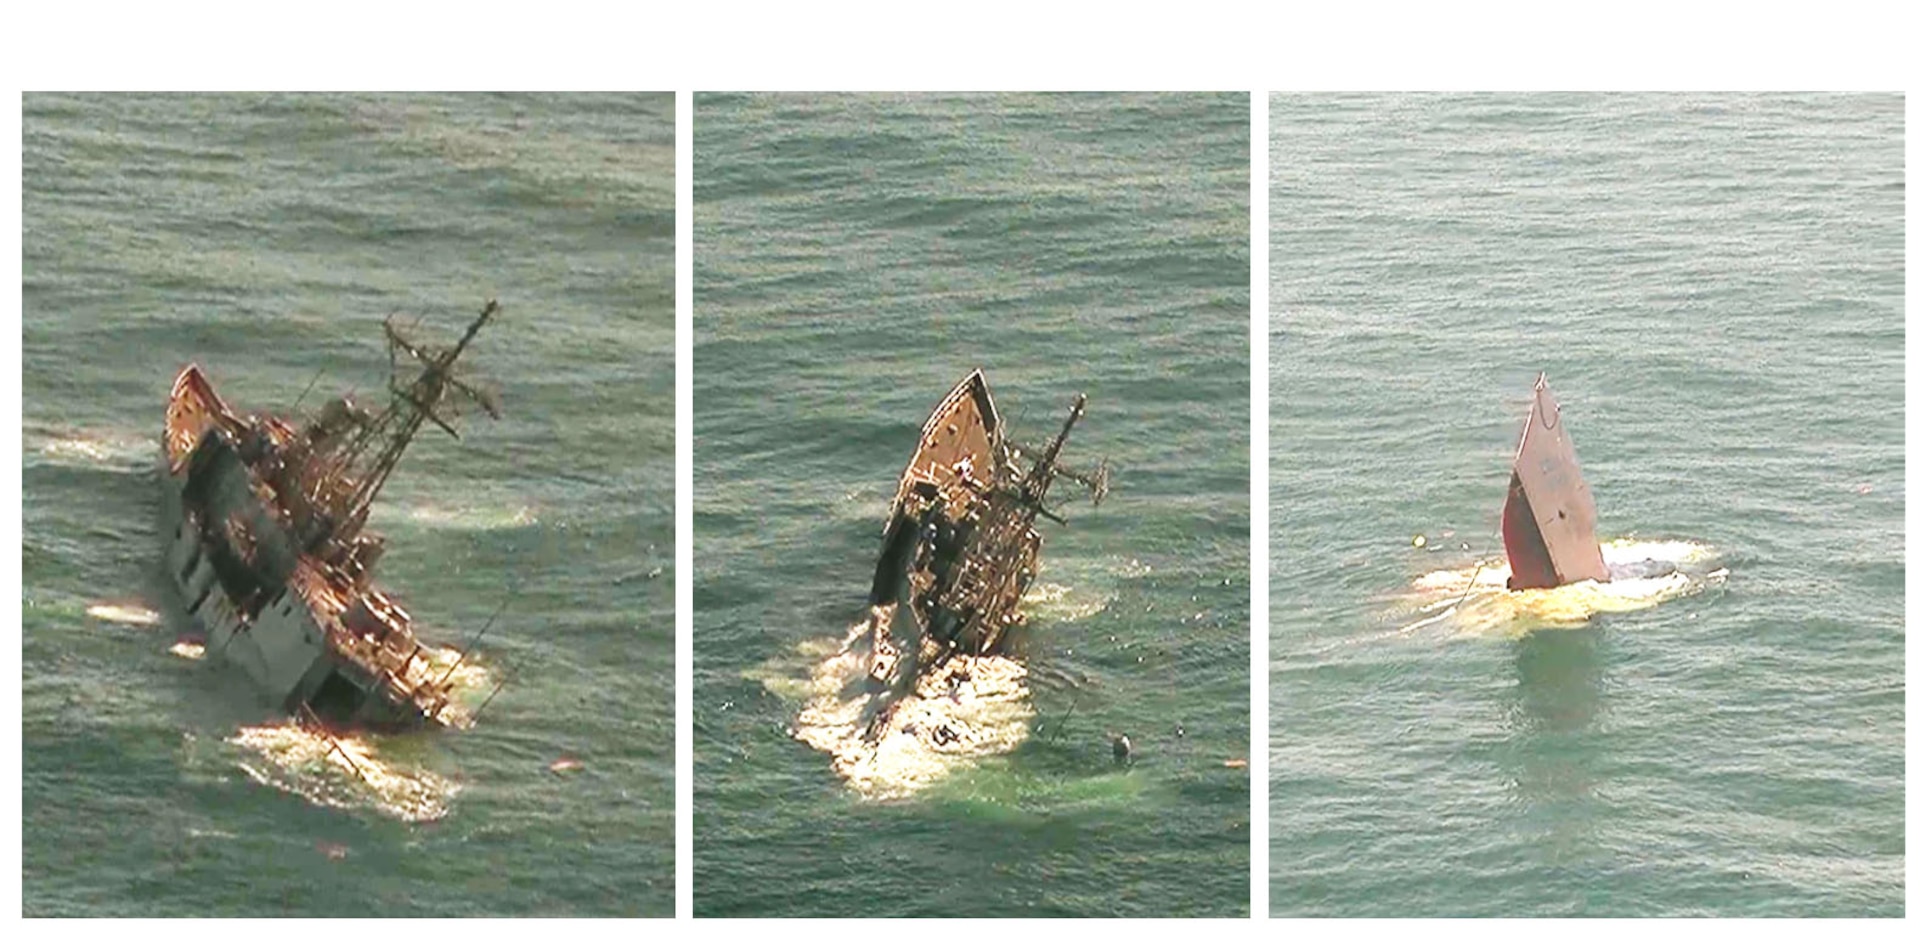 Ex-USS Boone (FFG 28) succumbs to overwhelming flooding and loss of buoyancy during the Atlantic Thunder 2022 sinking exercise (SINKEX) in the North Atlantic Ocean on Sept. 7, 2022. These images, captured by the U.S. Marine Corps unmanned aerial vehicle V-BAT, show the final moments before the ship sinks to her final resting place off the coast of Scotland. This SINKEX provided the U.S. and U.K. with invaluable training, collaboration and data to perform future allied missions. (U.S. Navy photo provided by Michael Kipp)